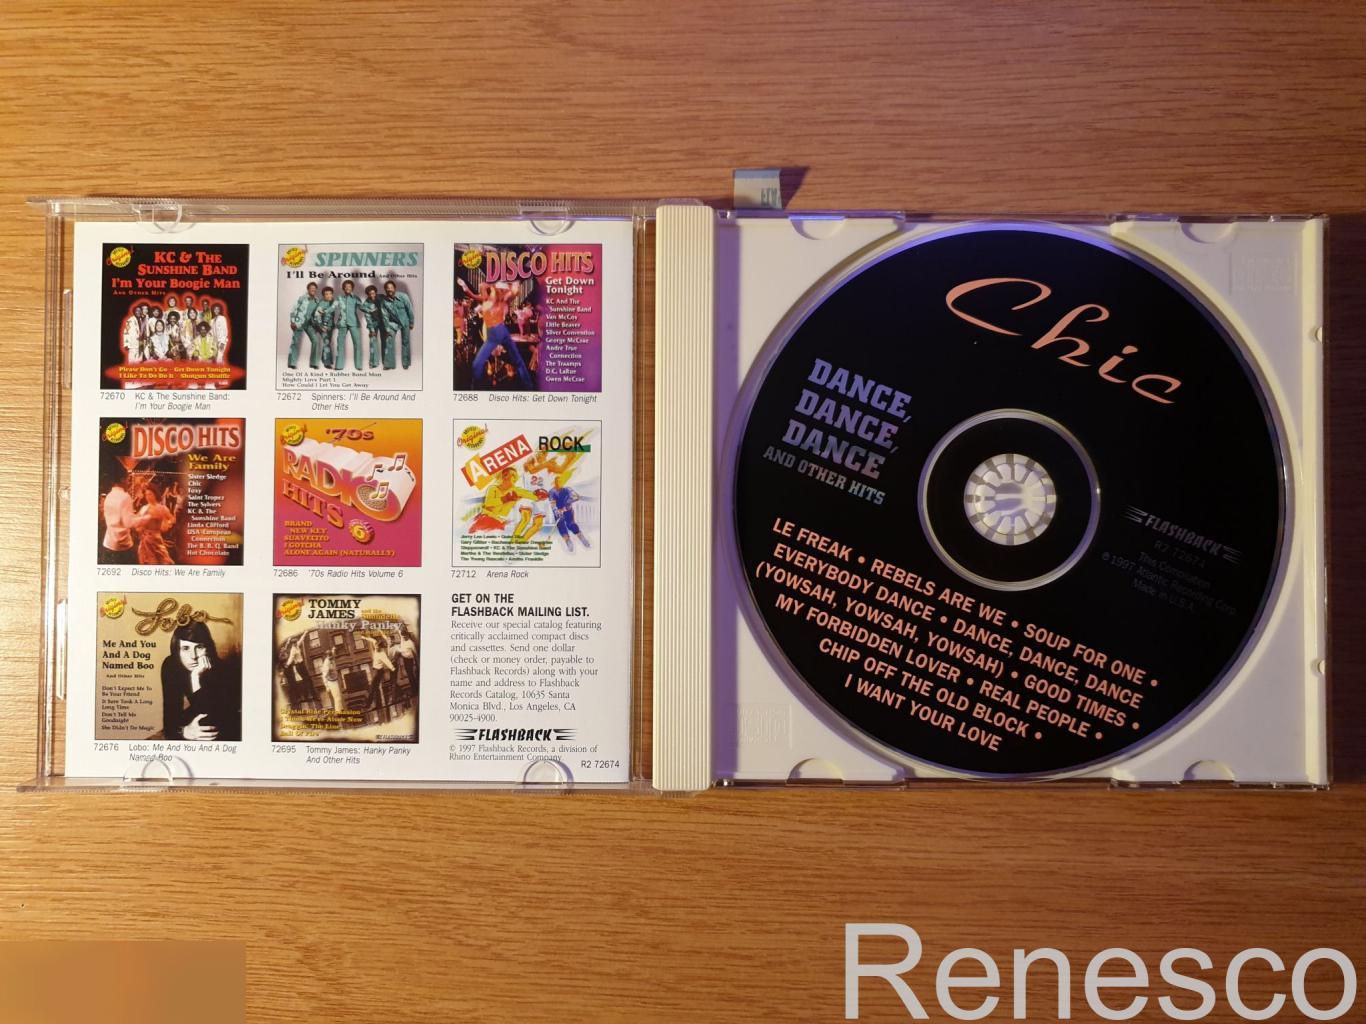 (CD) Chic ?– Dance, Dance, Dance, And Other Hits (1997) (USA) 2